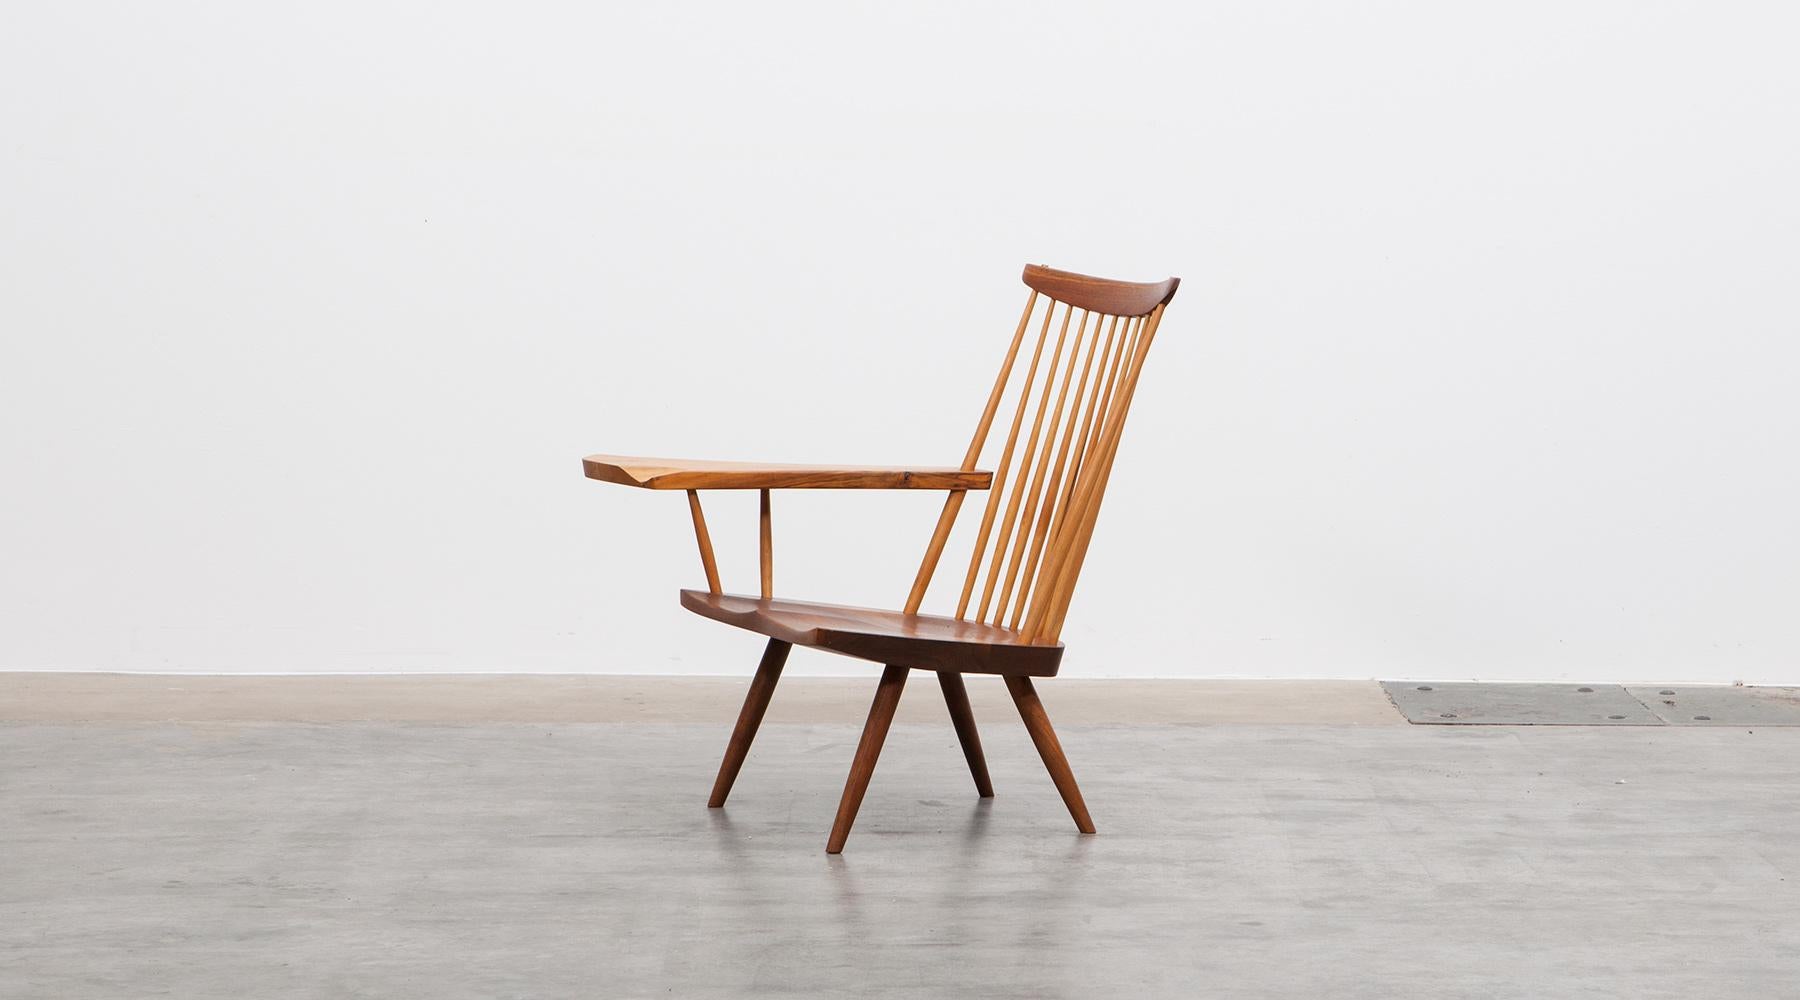 Armchair in walnut designed by George Nakashima, USA, 2003.

This handcrafted armchair by George Nakashima has a beautifully figured American walnut armrest with an organic and subtle freeform edge. Manufactured by Mira Nakashima studios in